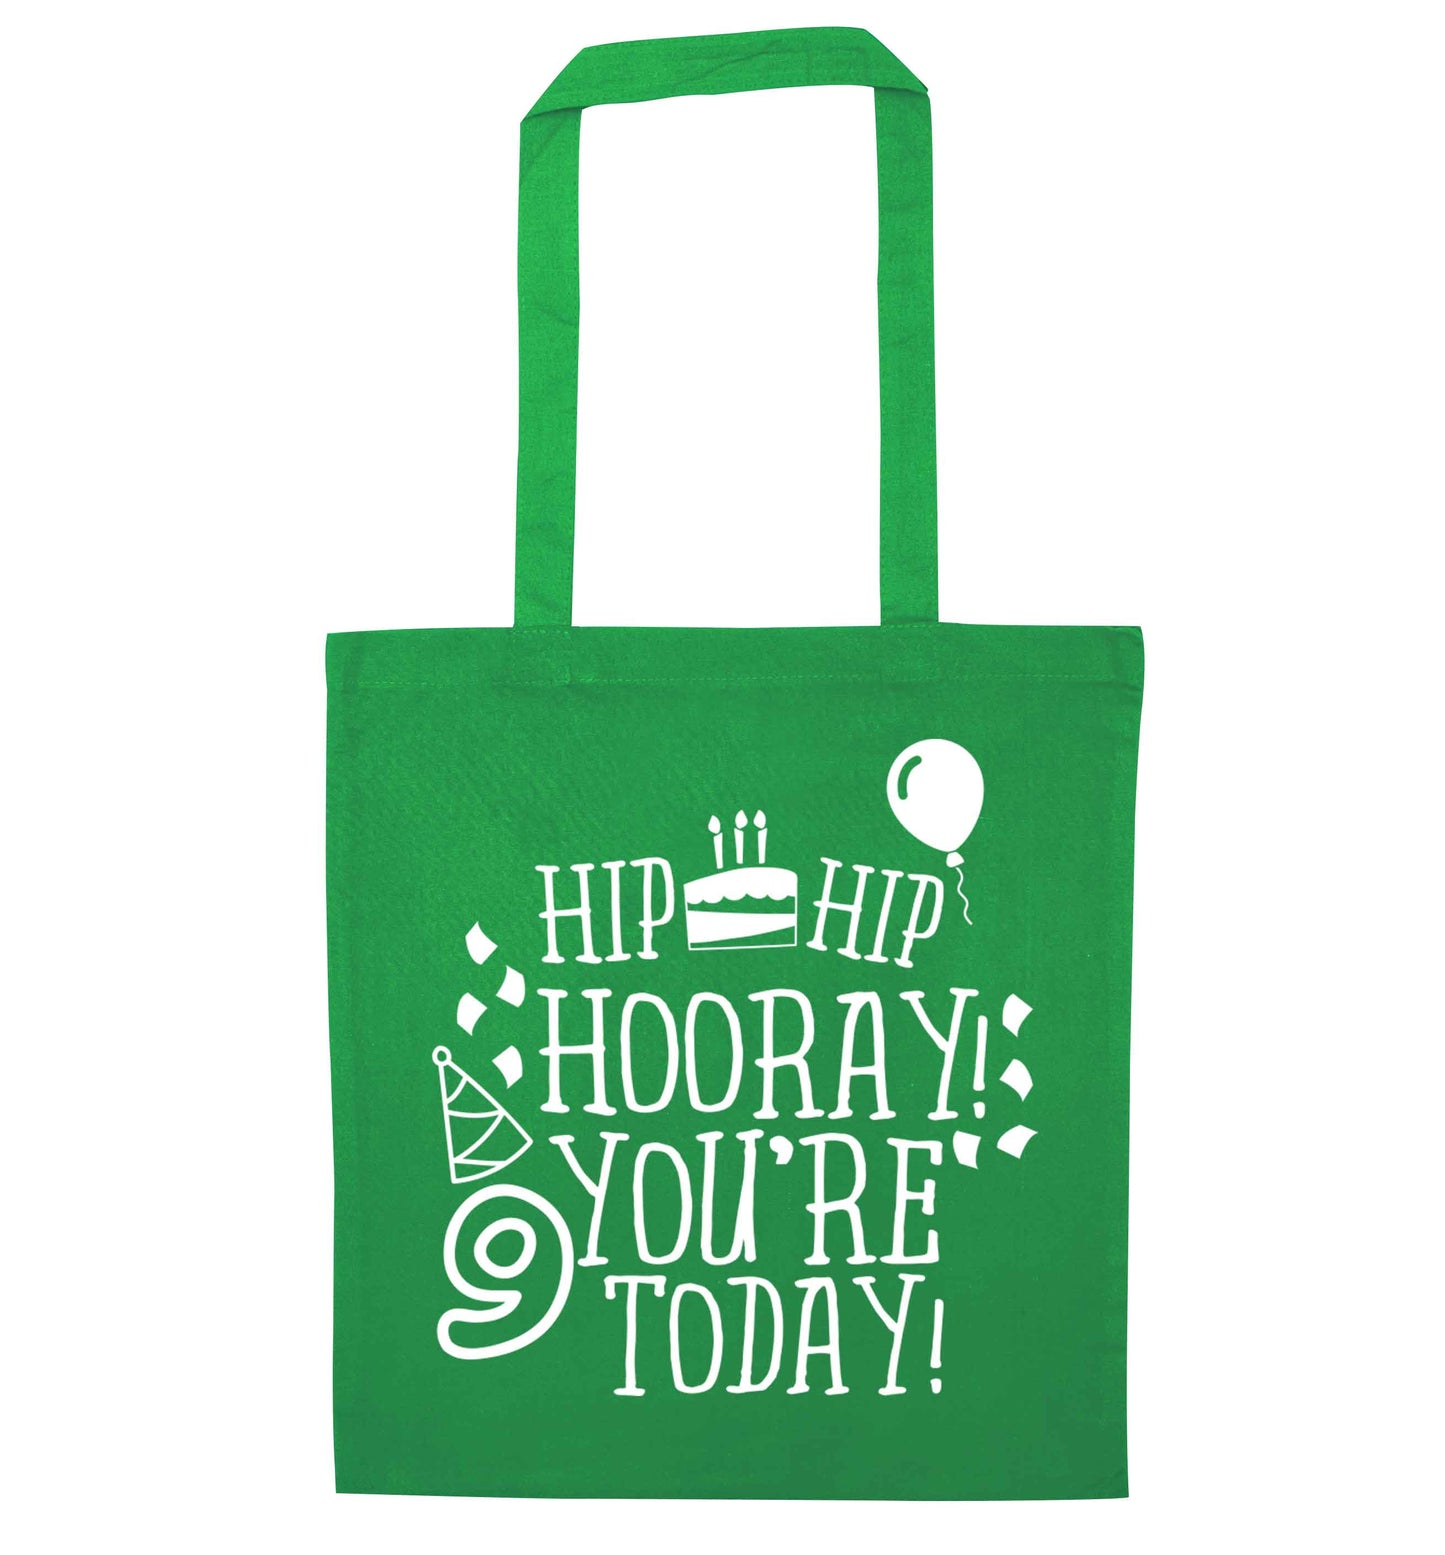 Hip hip hooray you're 9 today! green tote bag